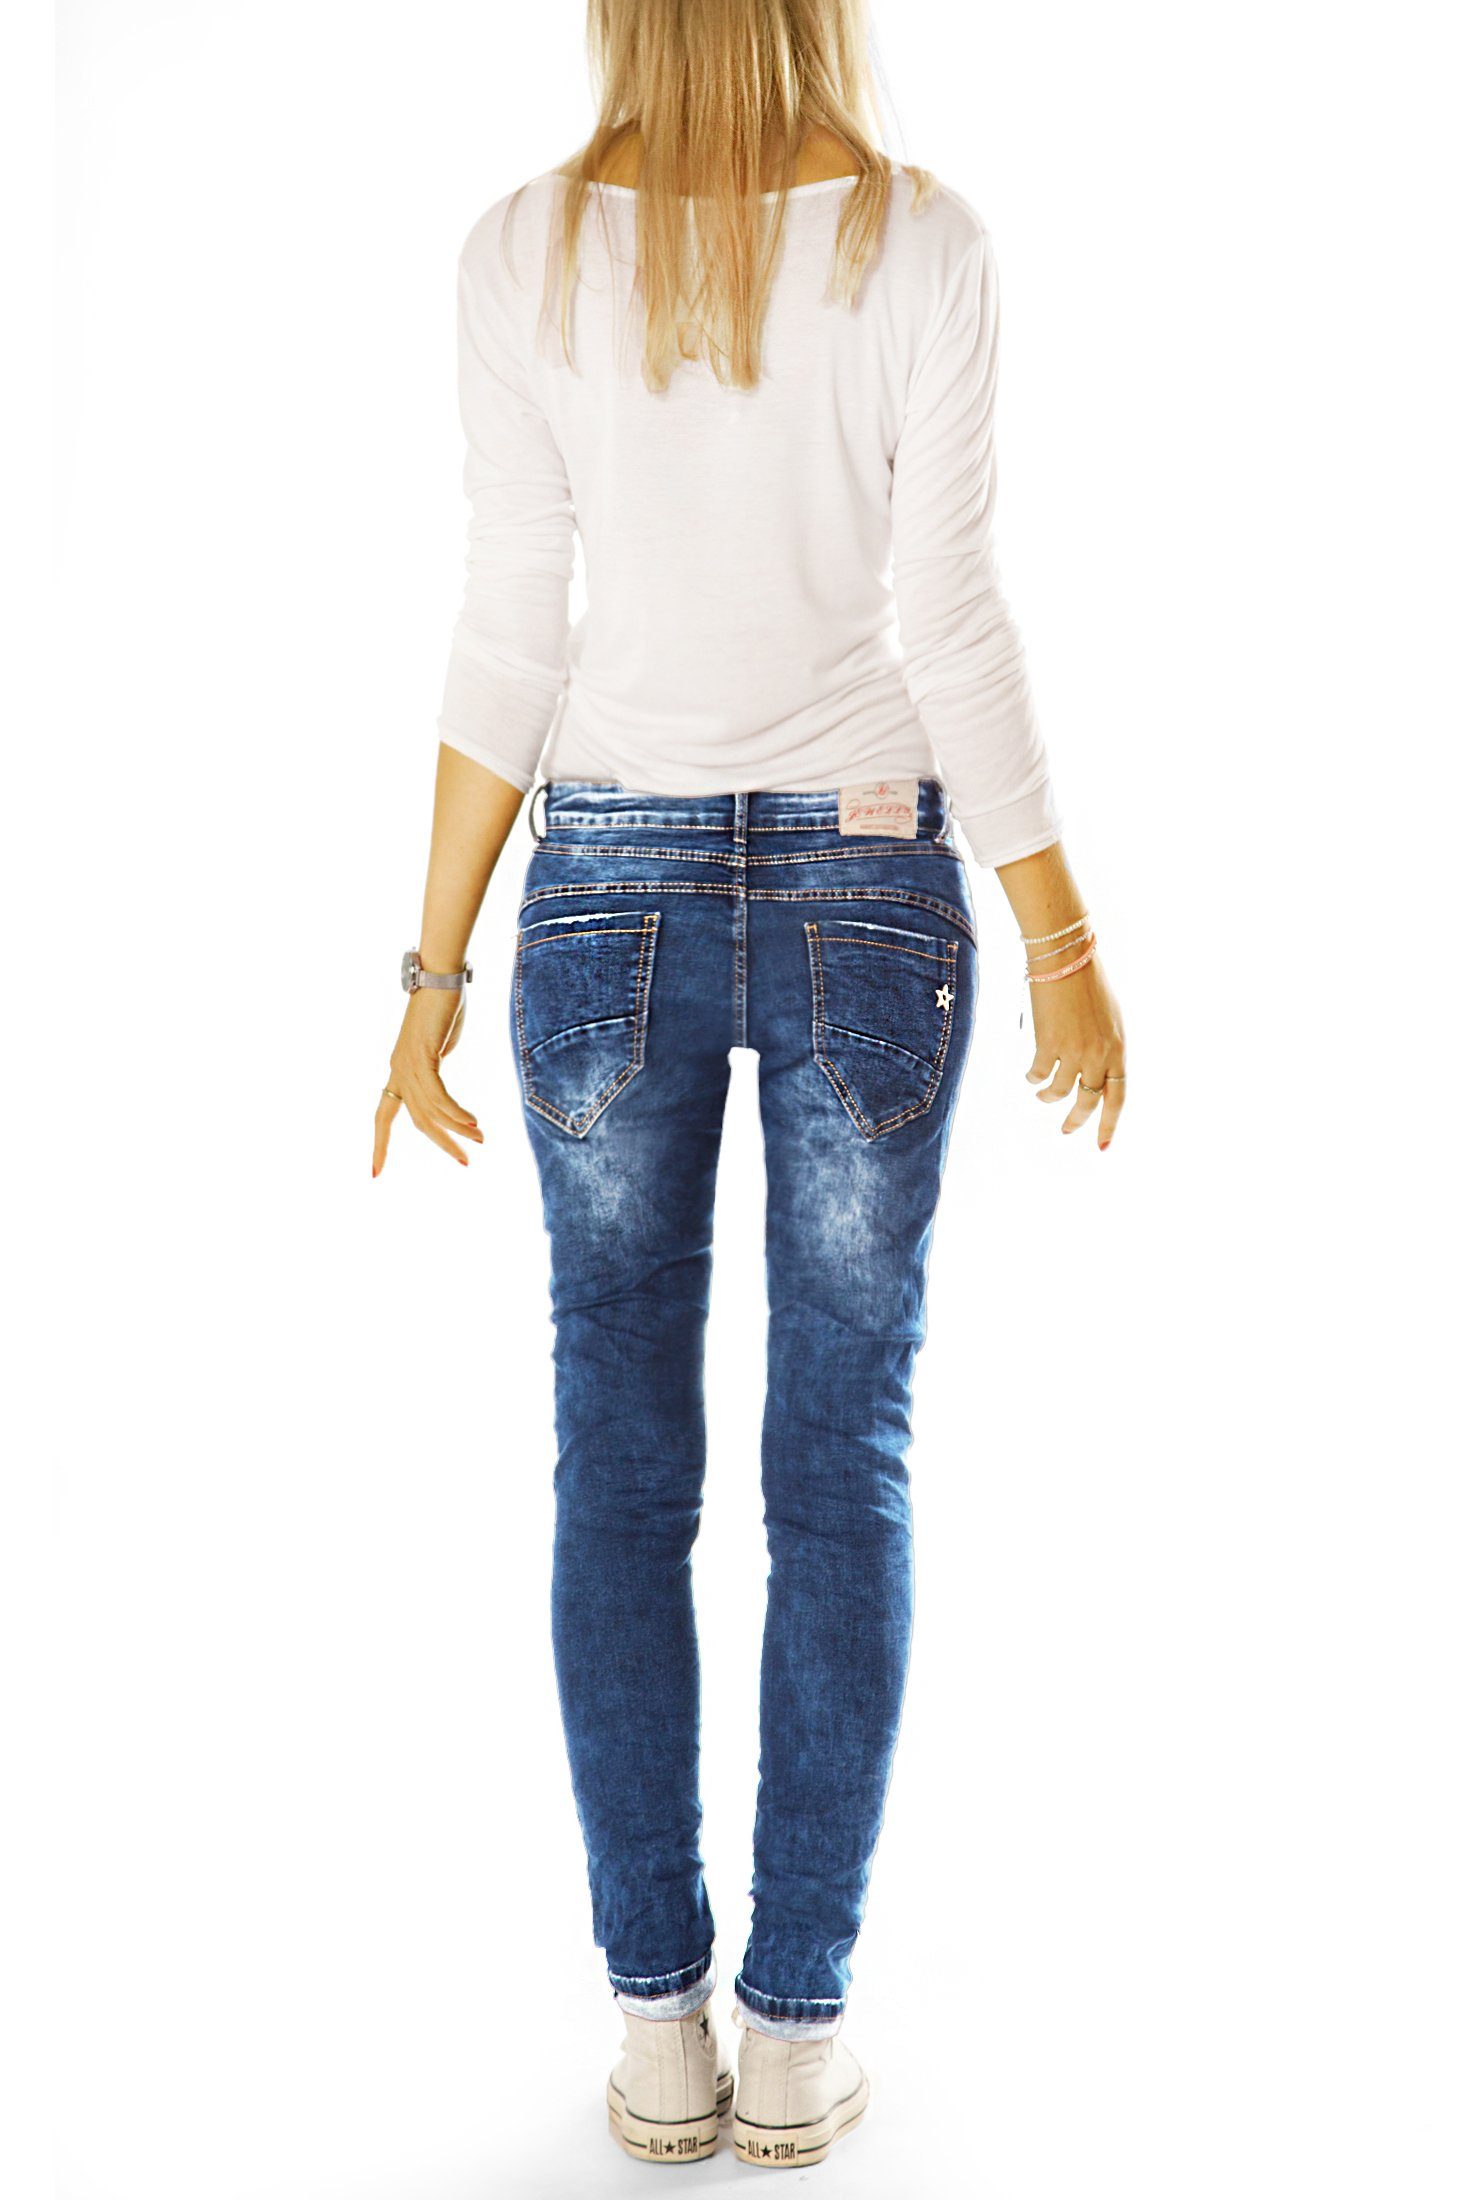 Damen Hüftjeans Look Relaxed mit - im Hose 5-Pocket-Style - Fit styled be Fit Slim-fit-Jeans Slim Stretch-Anteil, j4g-1